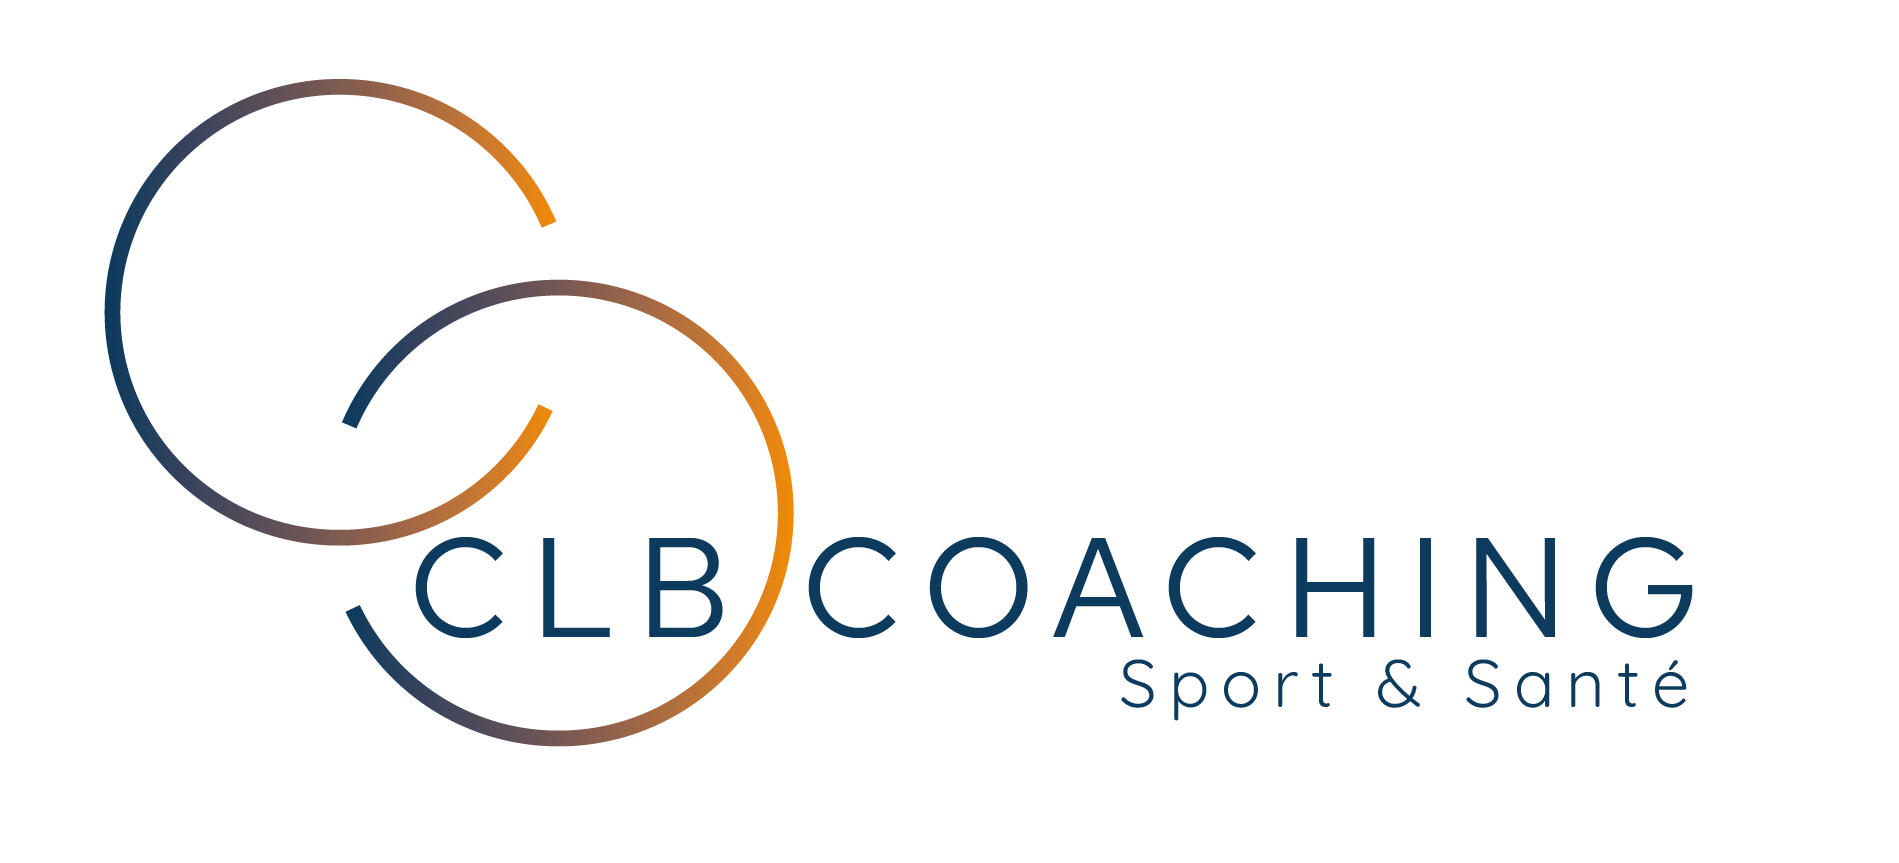 CLBCOACHING